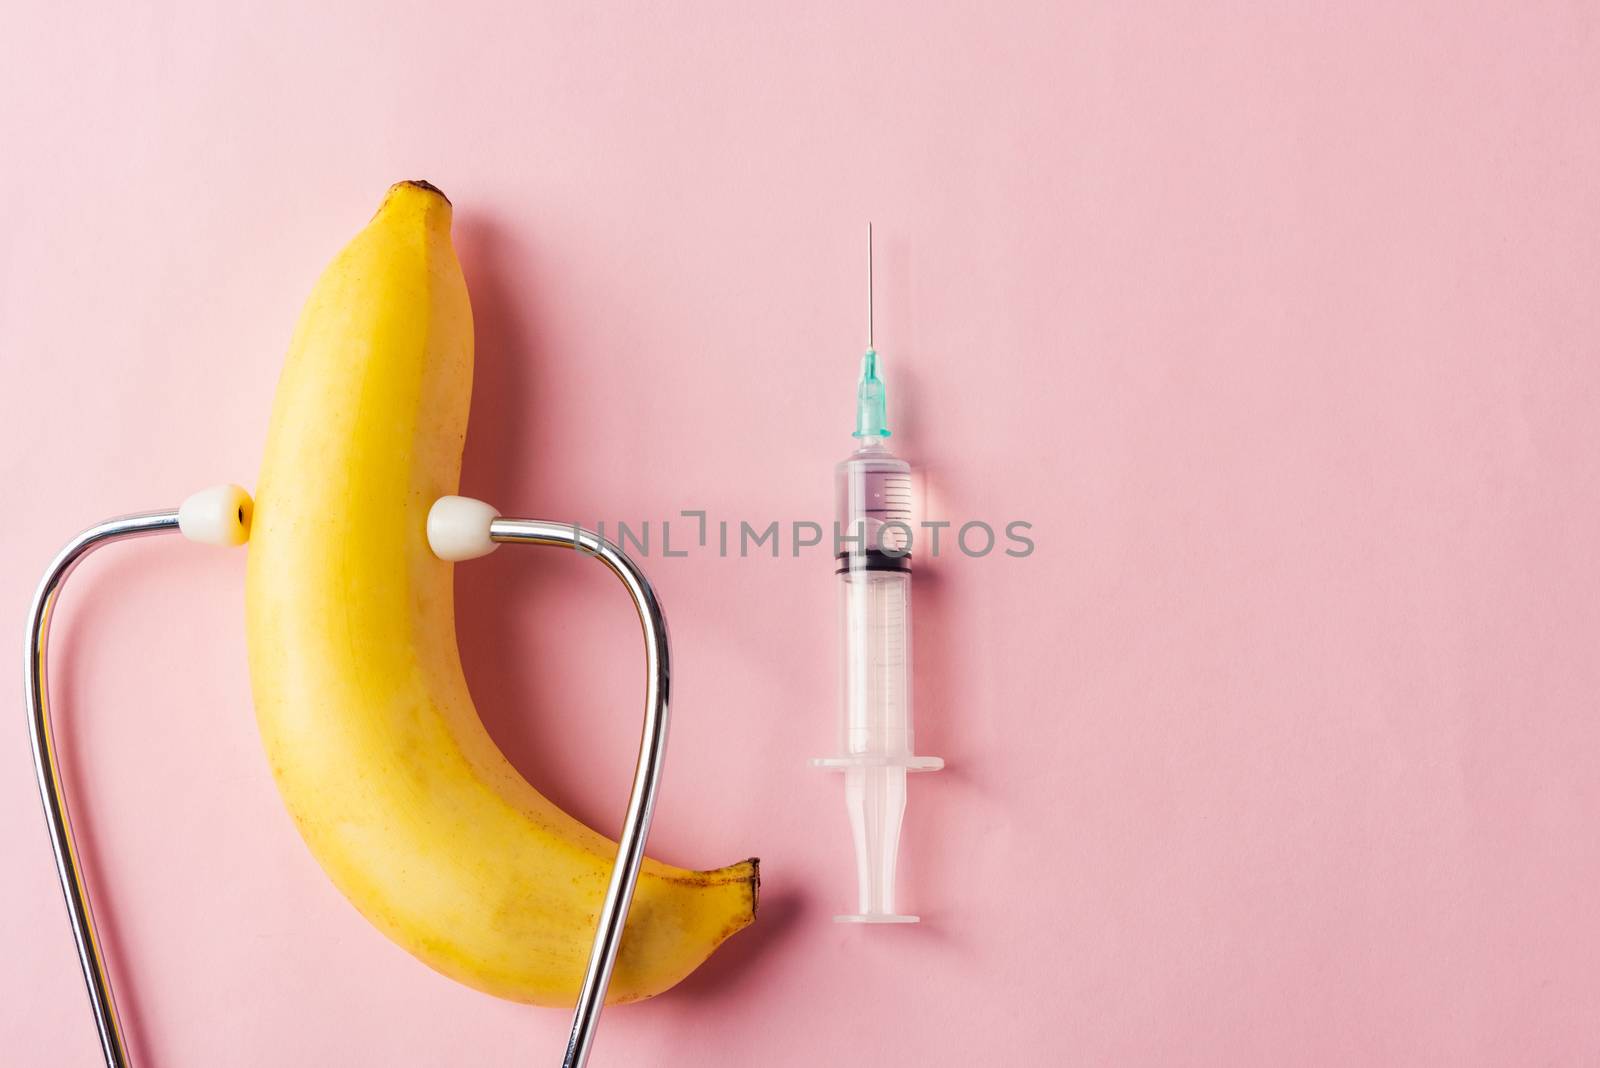 World sexual health or Aids day, Top view flat lay condom in wrapper pack, syringe and doctor stethoscope, studio shot isolated on a pink background, Safe sex and reproductive health concept